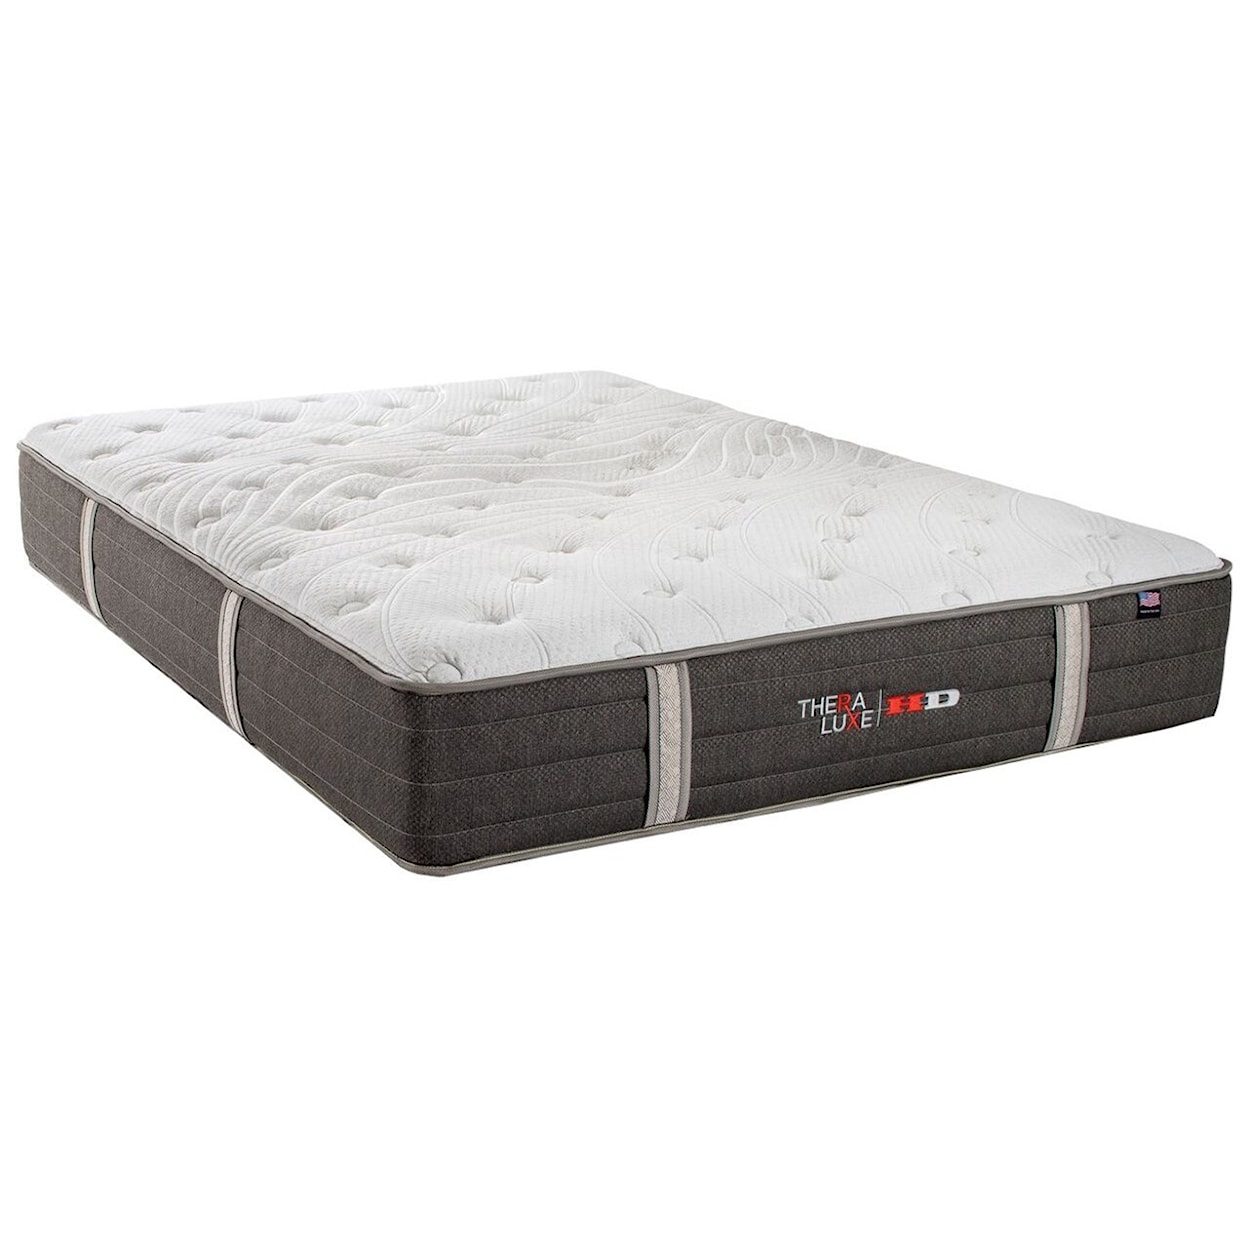 Therapedic Thera Luxe HD Balsam Full Firm Pocketed Coil Mattress